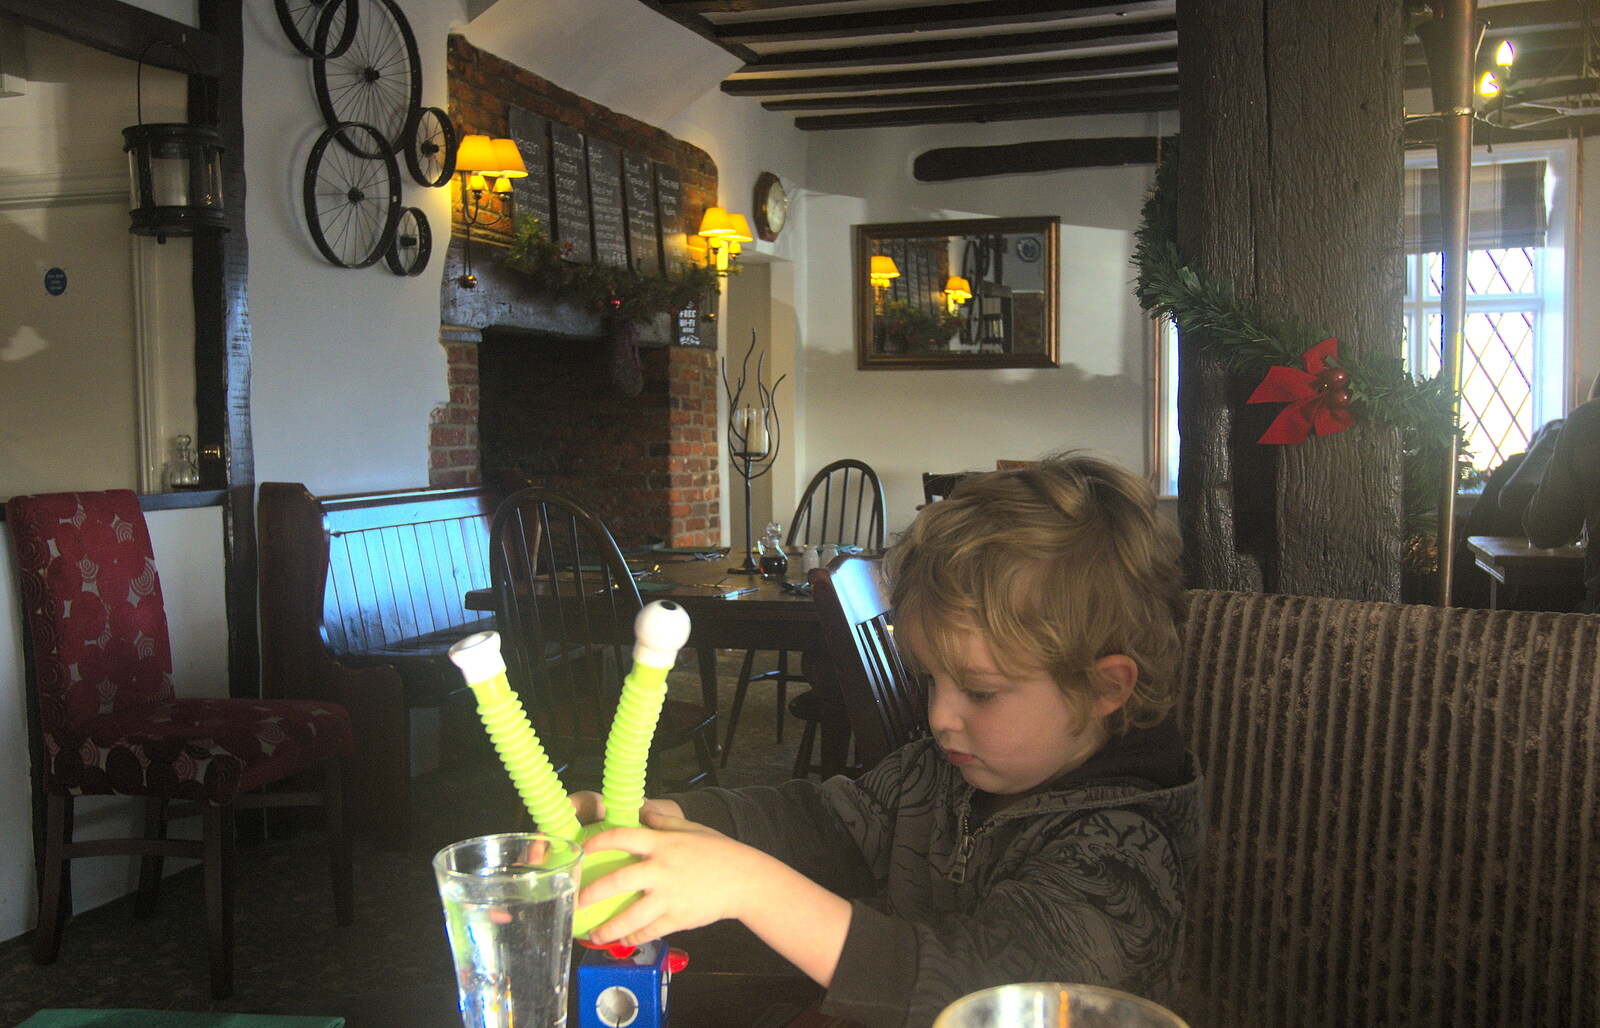 Fred plays with some sort of space toy from New Year's Day and Lunch at the White Horse, Ipswich, Finningham and Brome - 1st January 2013